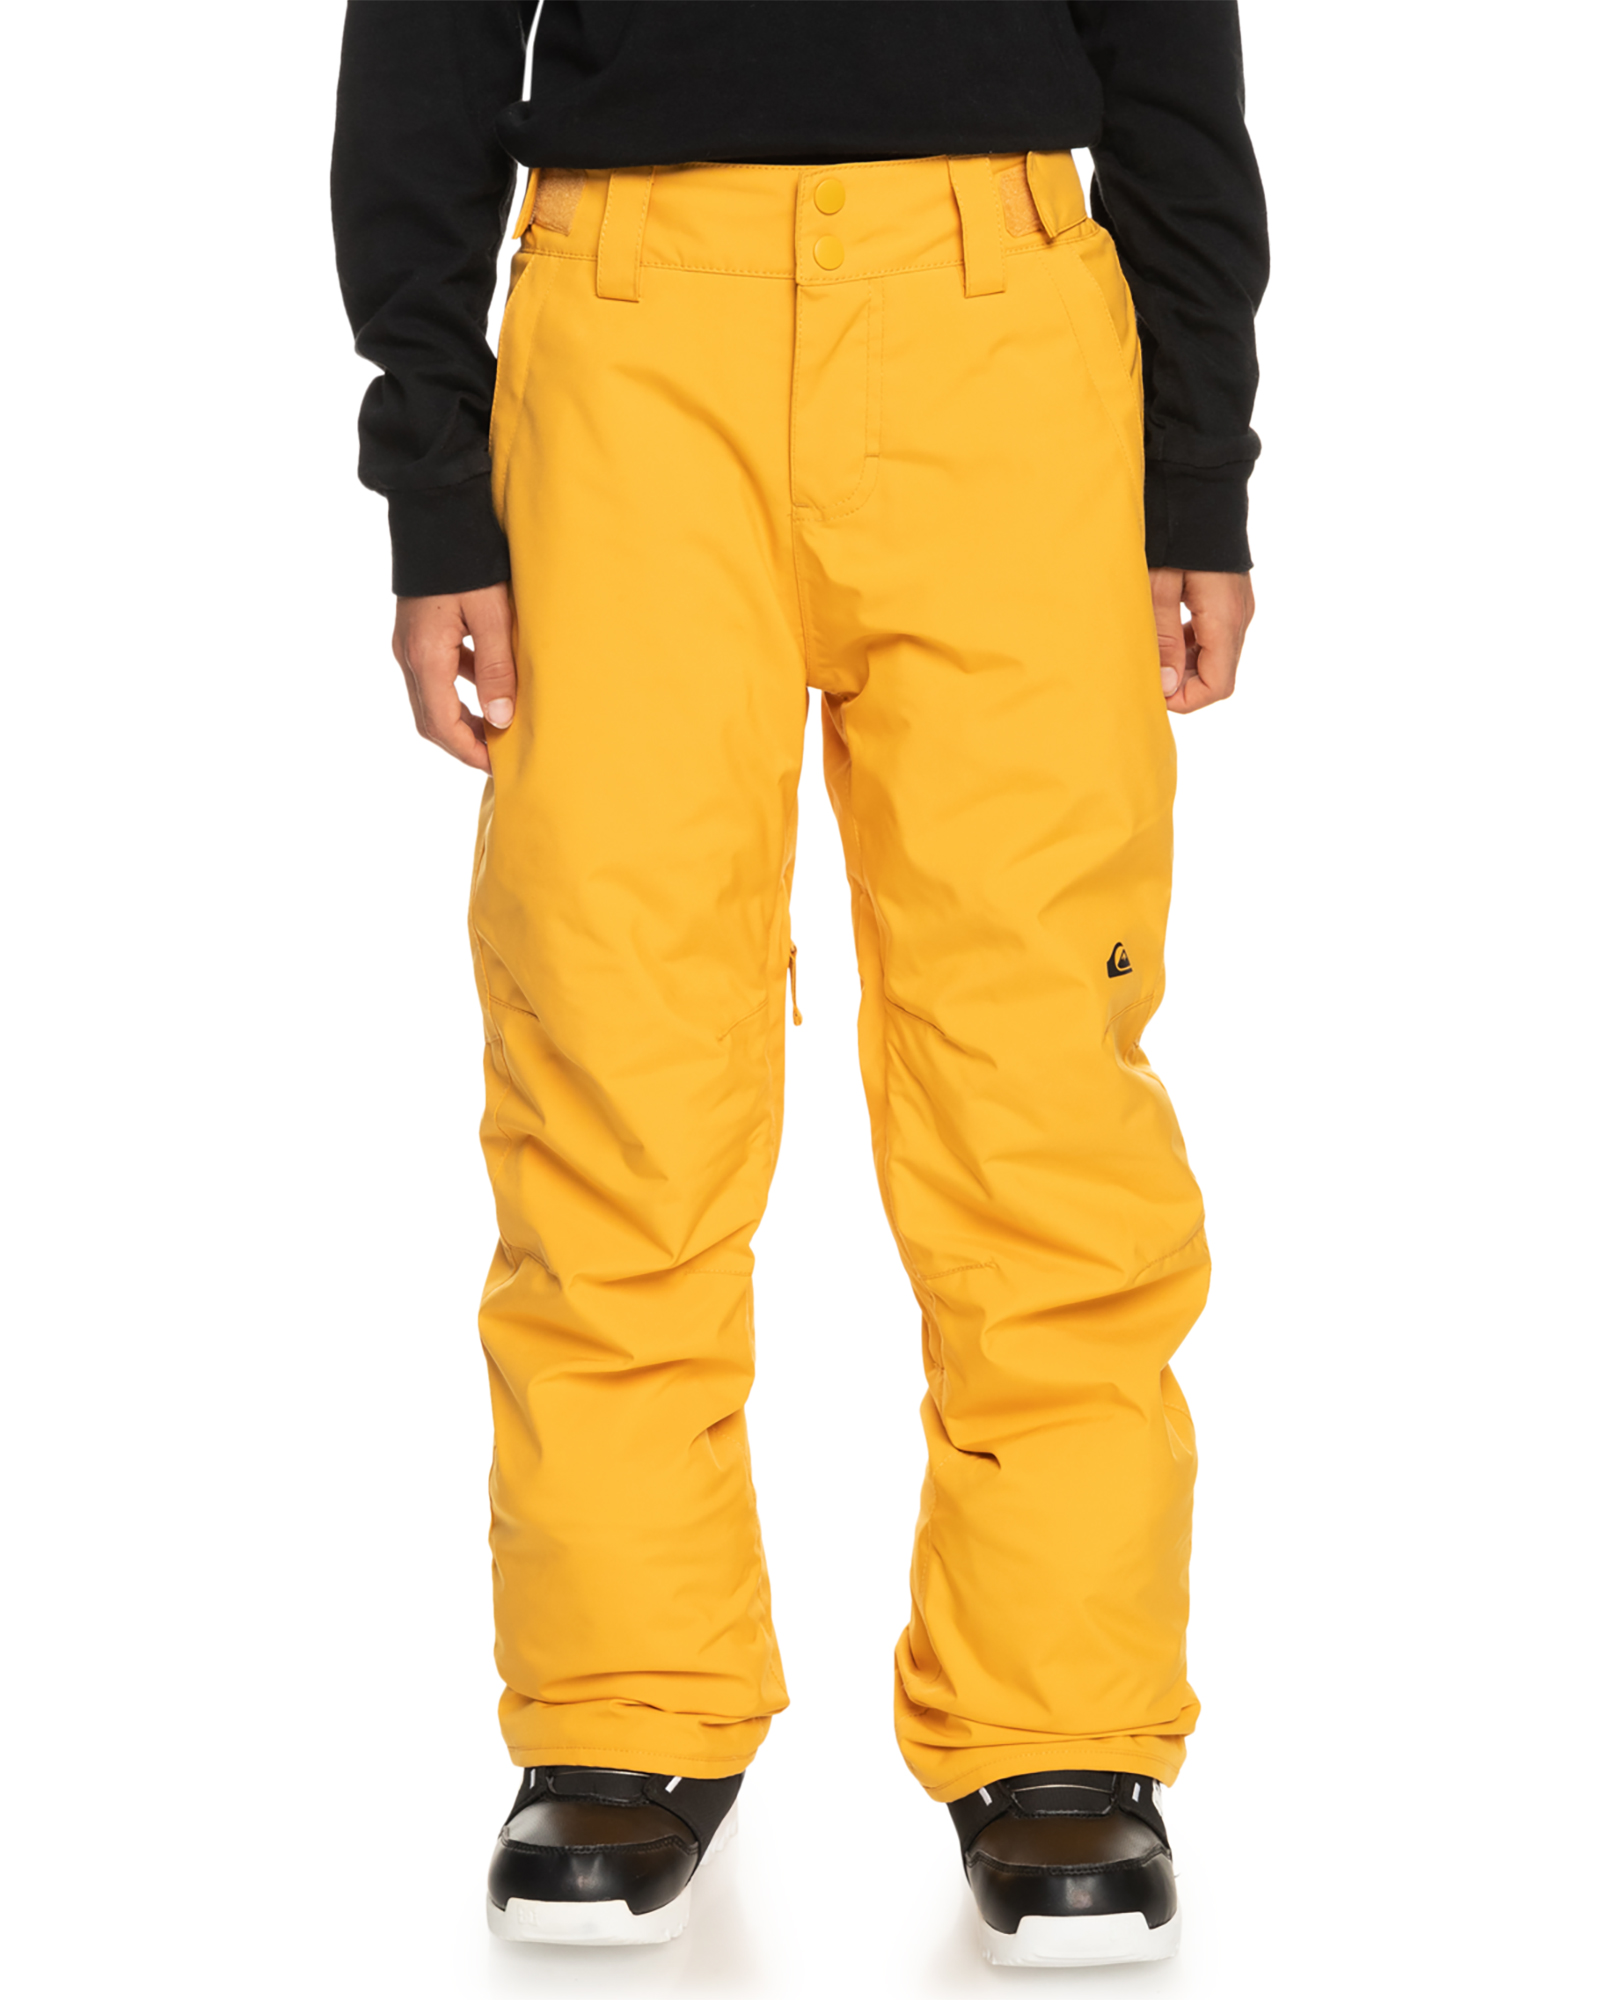 Quiksilver Estate Boys’ Pants - Mineral Yellow 12 Years